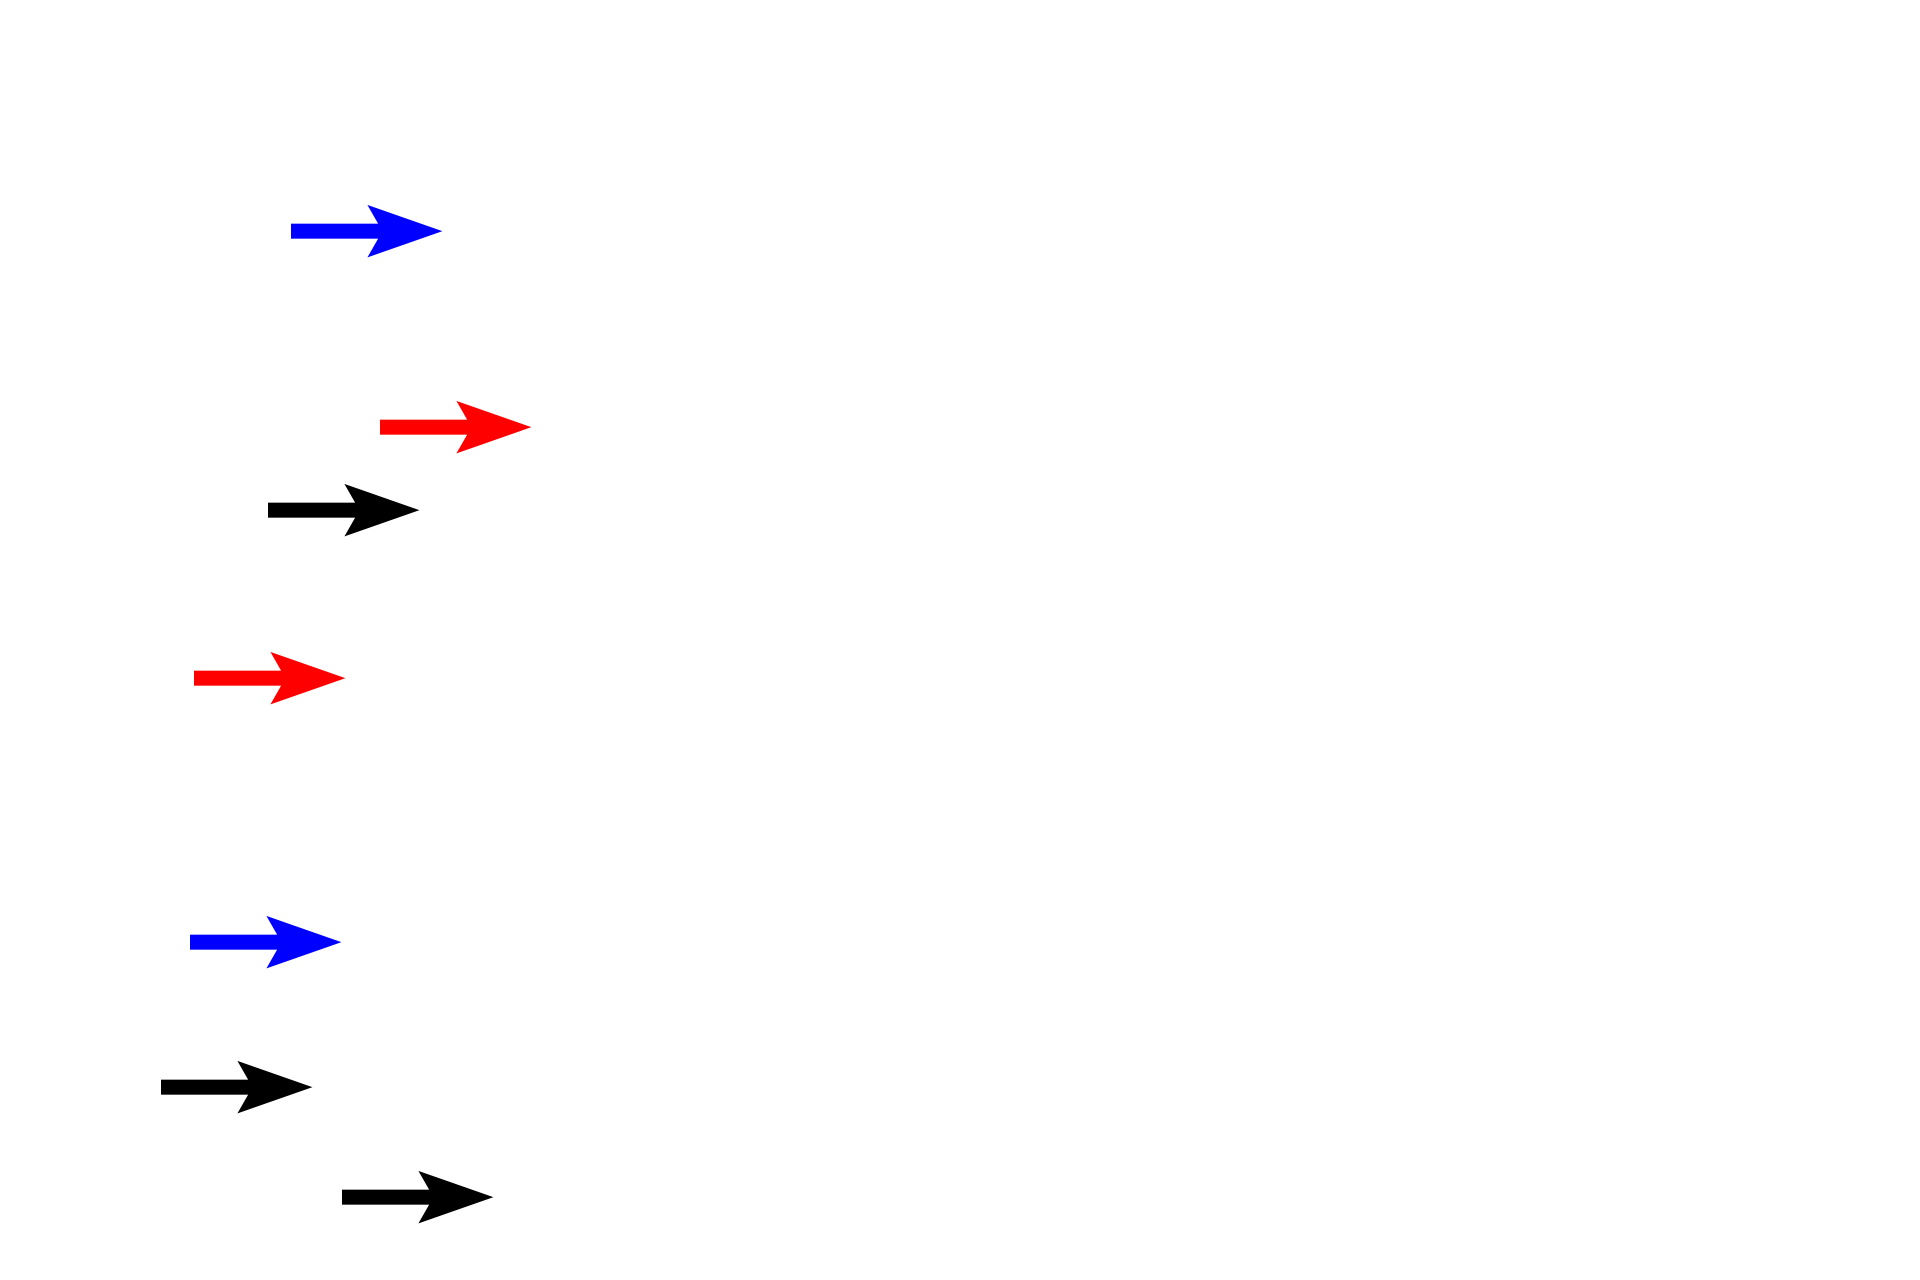 Loose connective tisssue > <p>Loose connective tissue is characterized by having delicate collagen fibers (blue arrows), many and various cell types (black arrows), and a gelatinous ground substance (red arrows). Loose connective tissue provides for diffusion and padding but little strength.</p>
